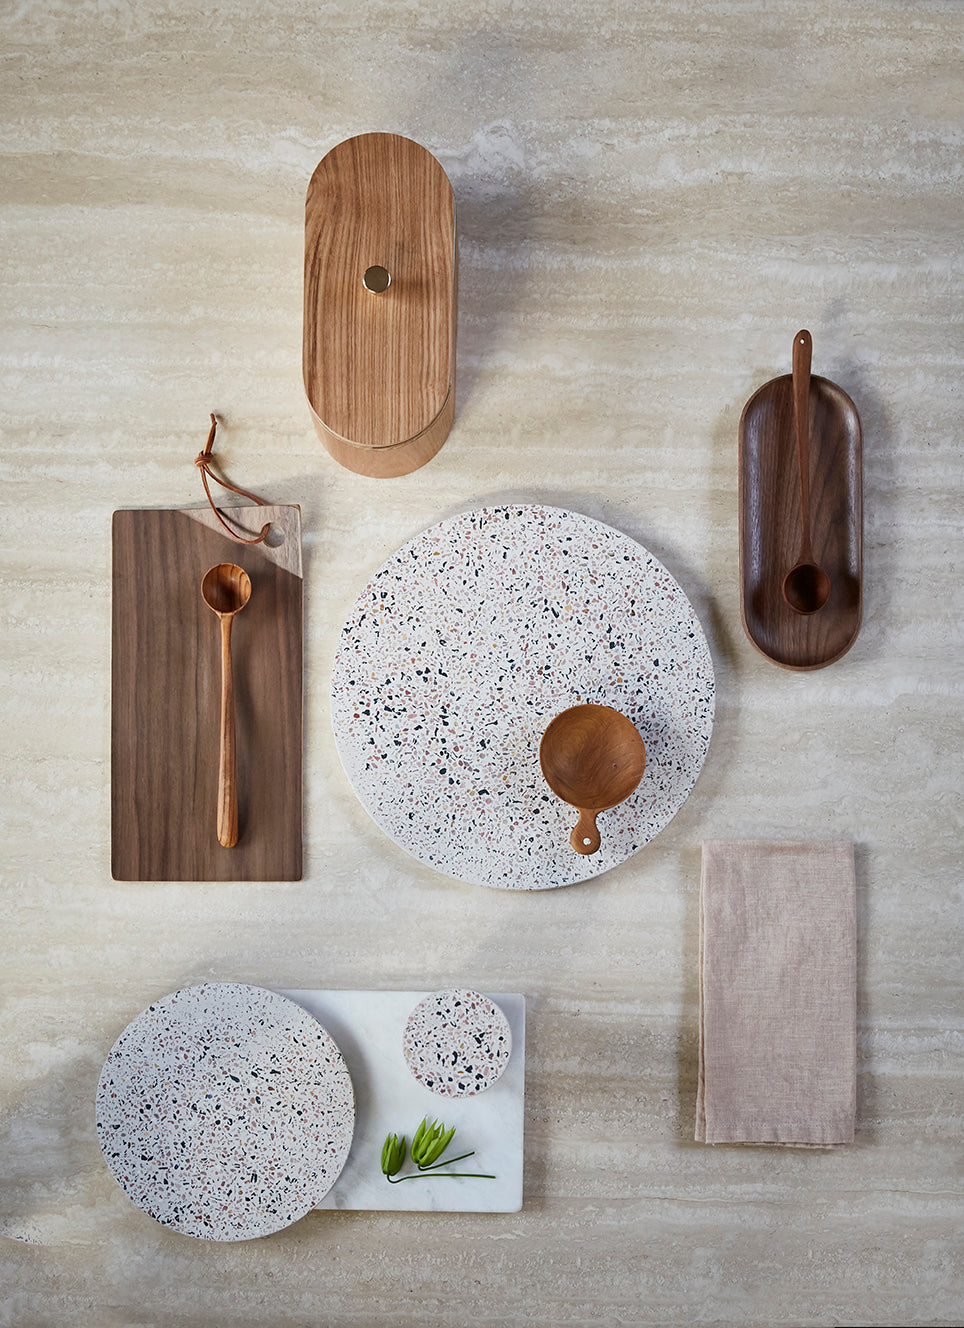 marble counter top with round terrazzo cutting plates and a brown wooden oval box with lid